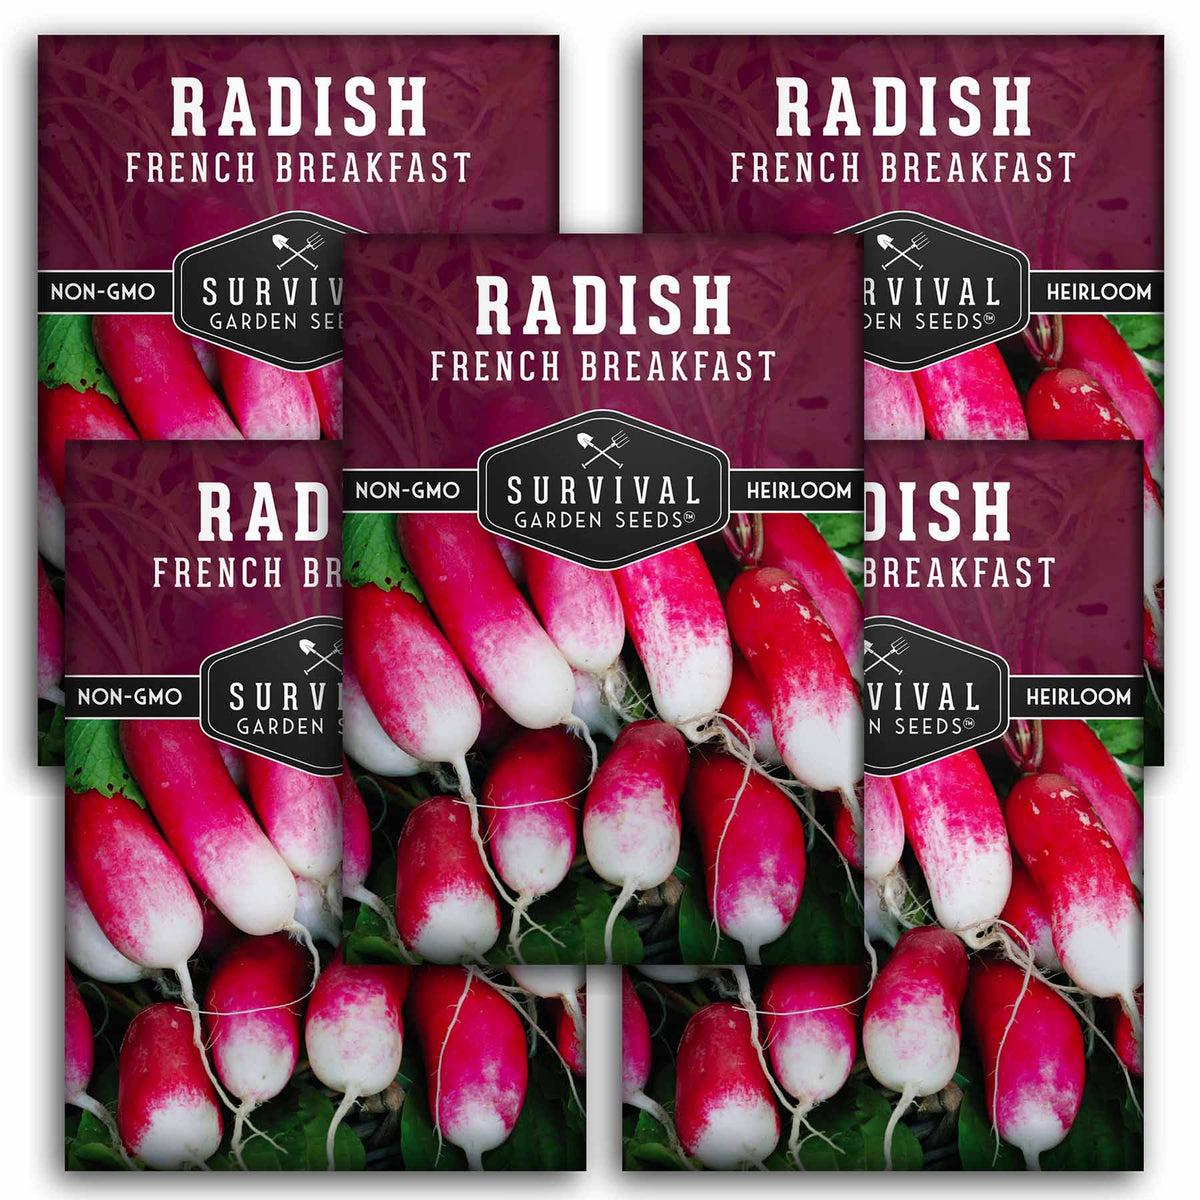 5 packets of French Breakfast Radish seeds